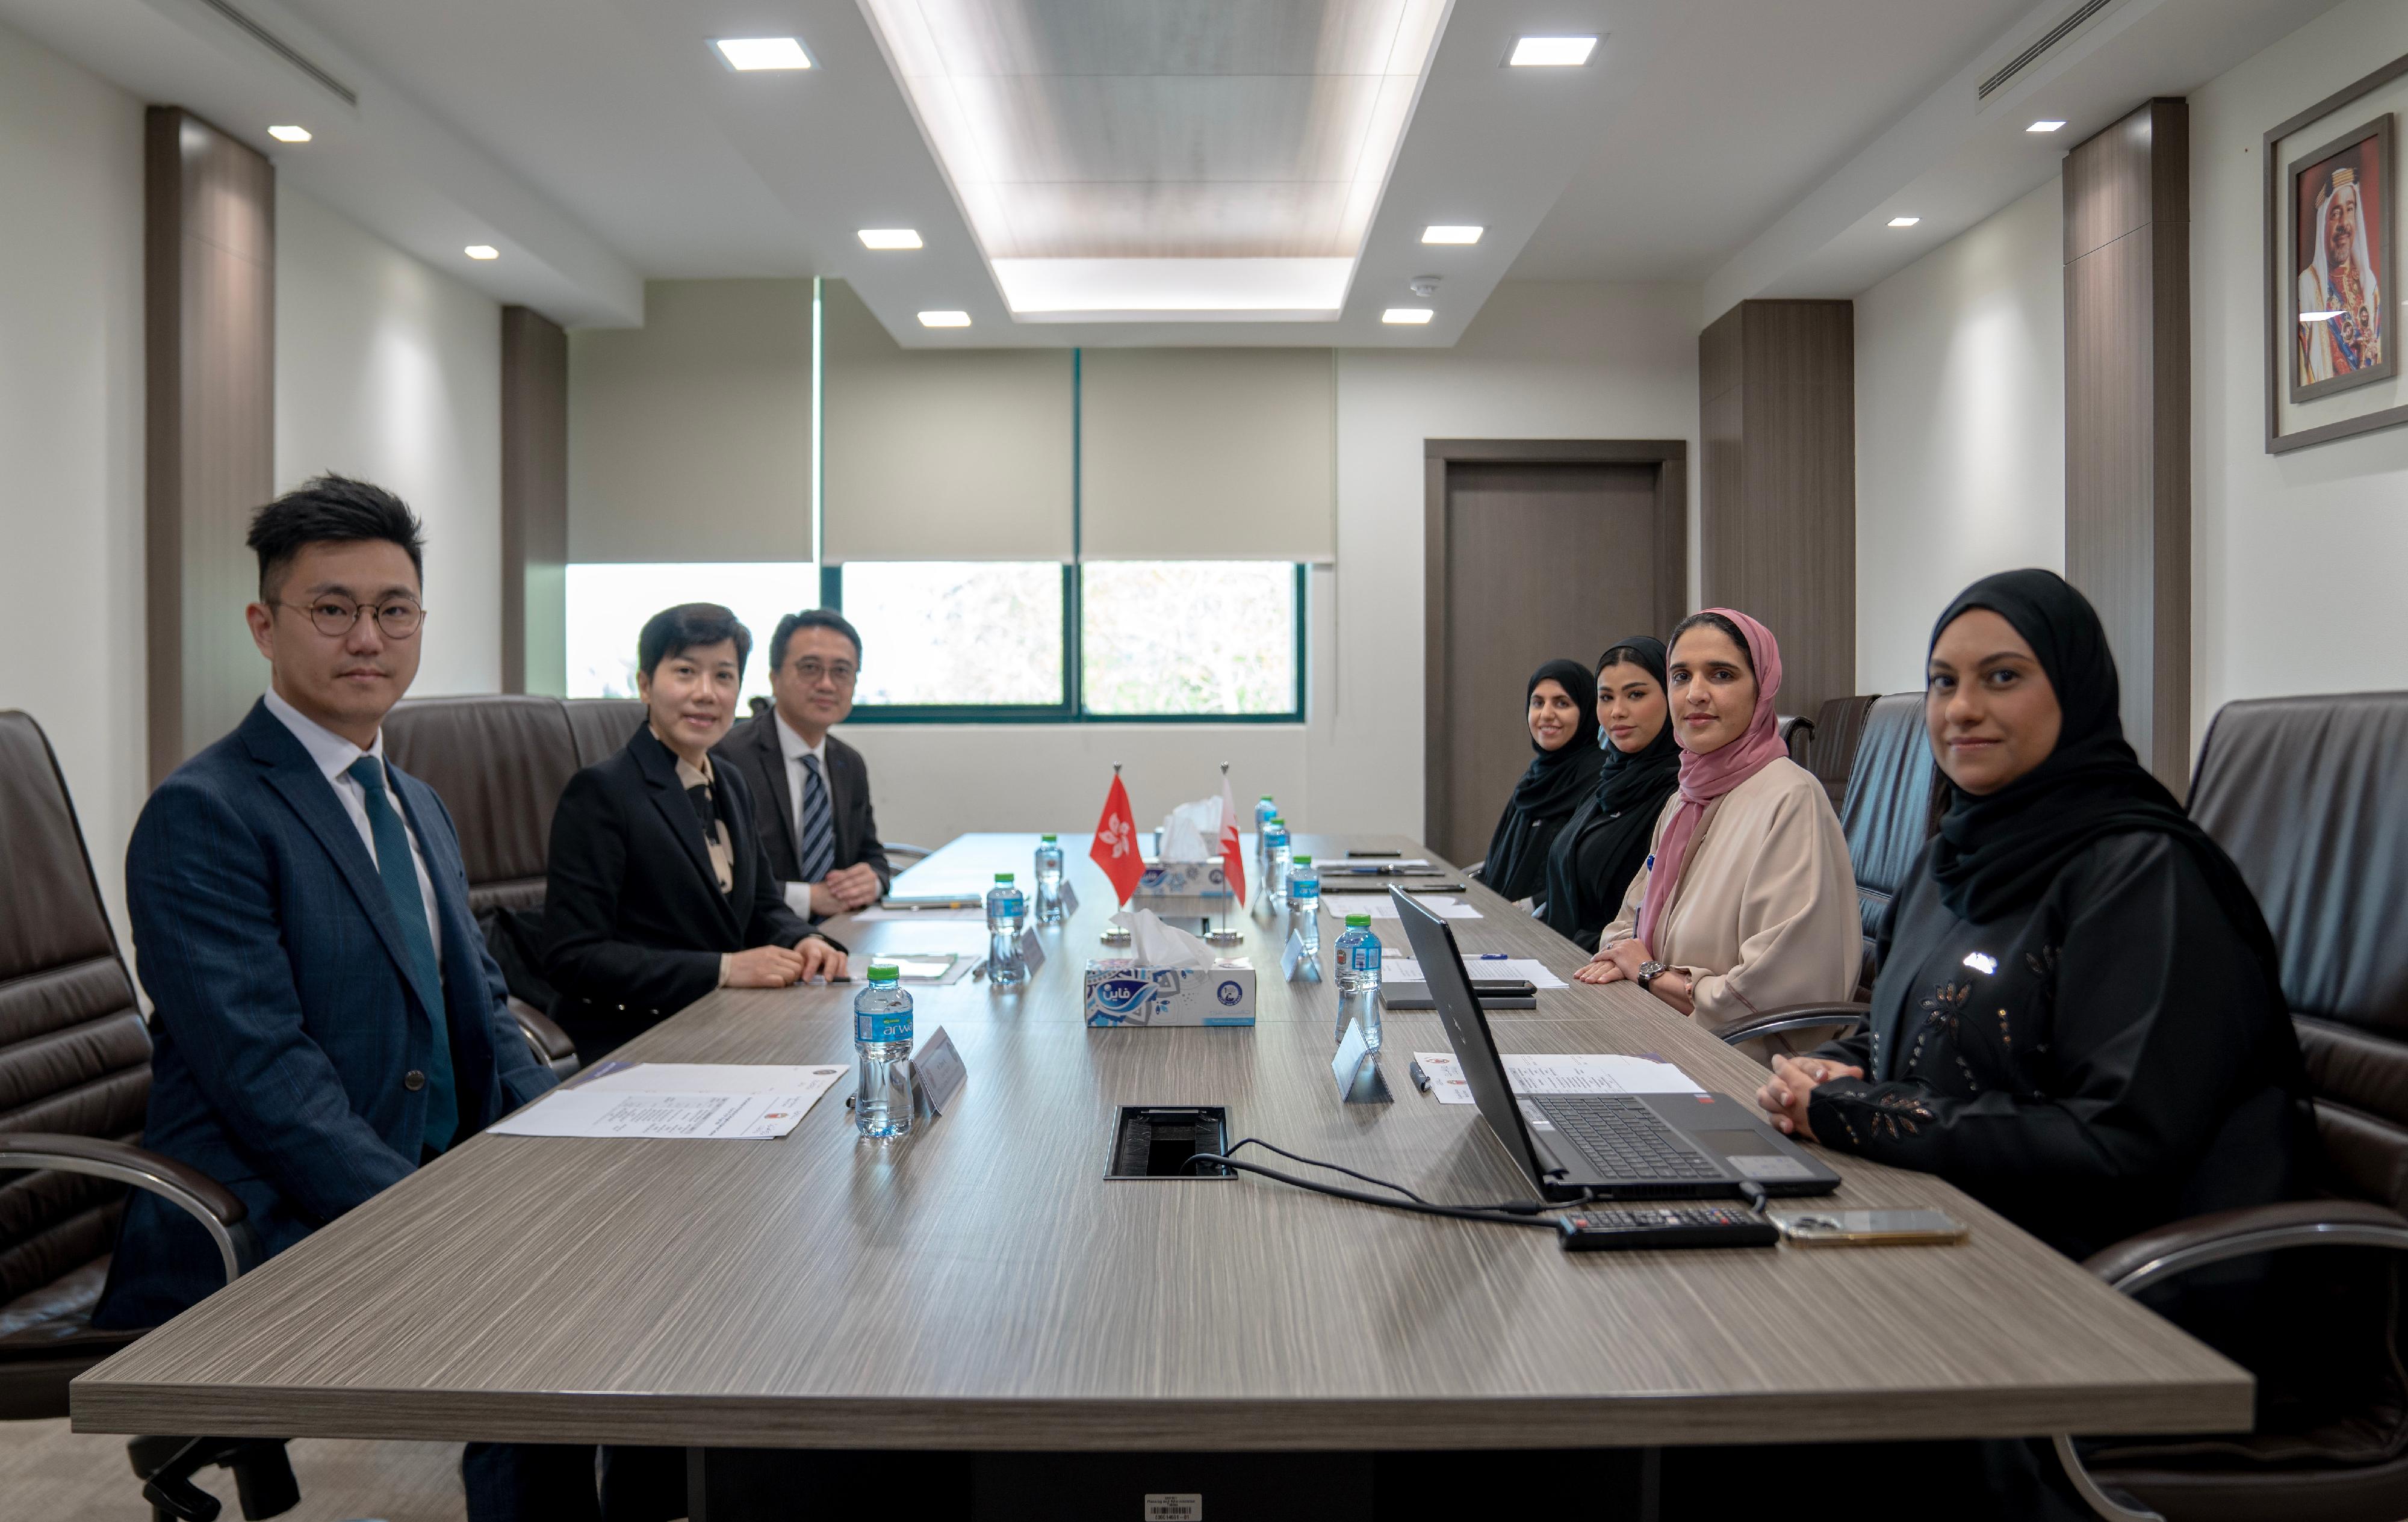 The Commissioner of Customs and Excise, Ms Louise Ho (second left), today (April 22) led a delegation of Hong Kong Customs to visit the Bahrain Customs Affairs (BCA) and conducted a meeting with the BCA delegation.